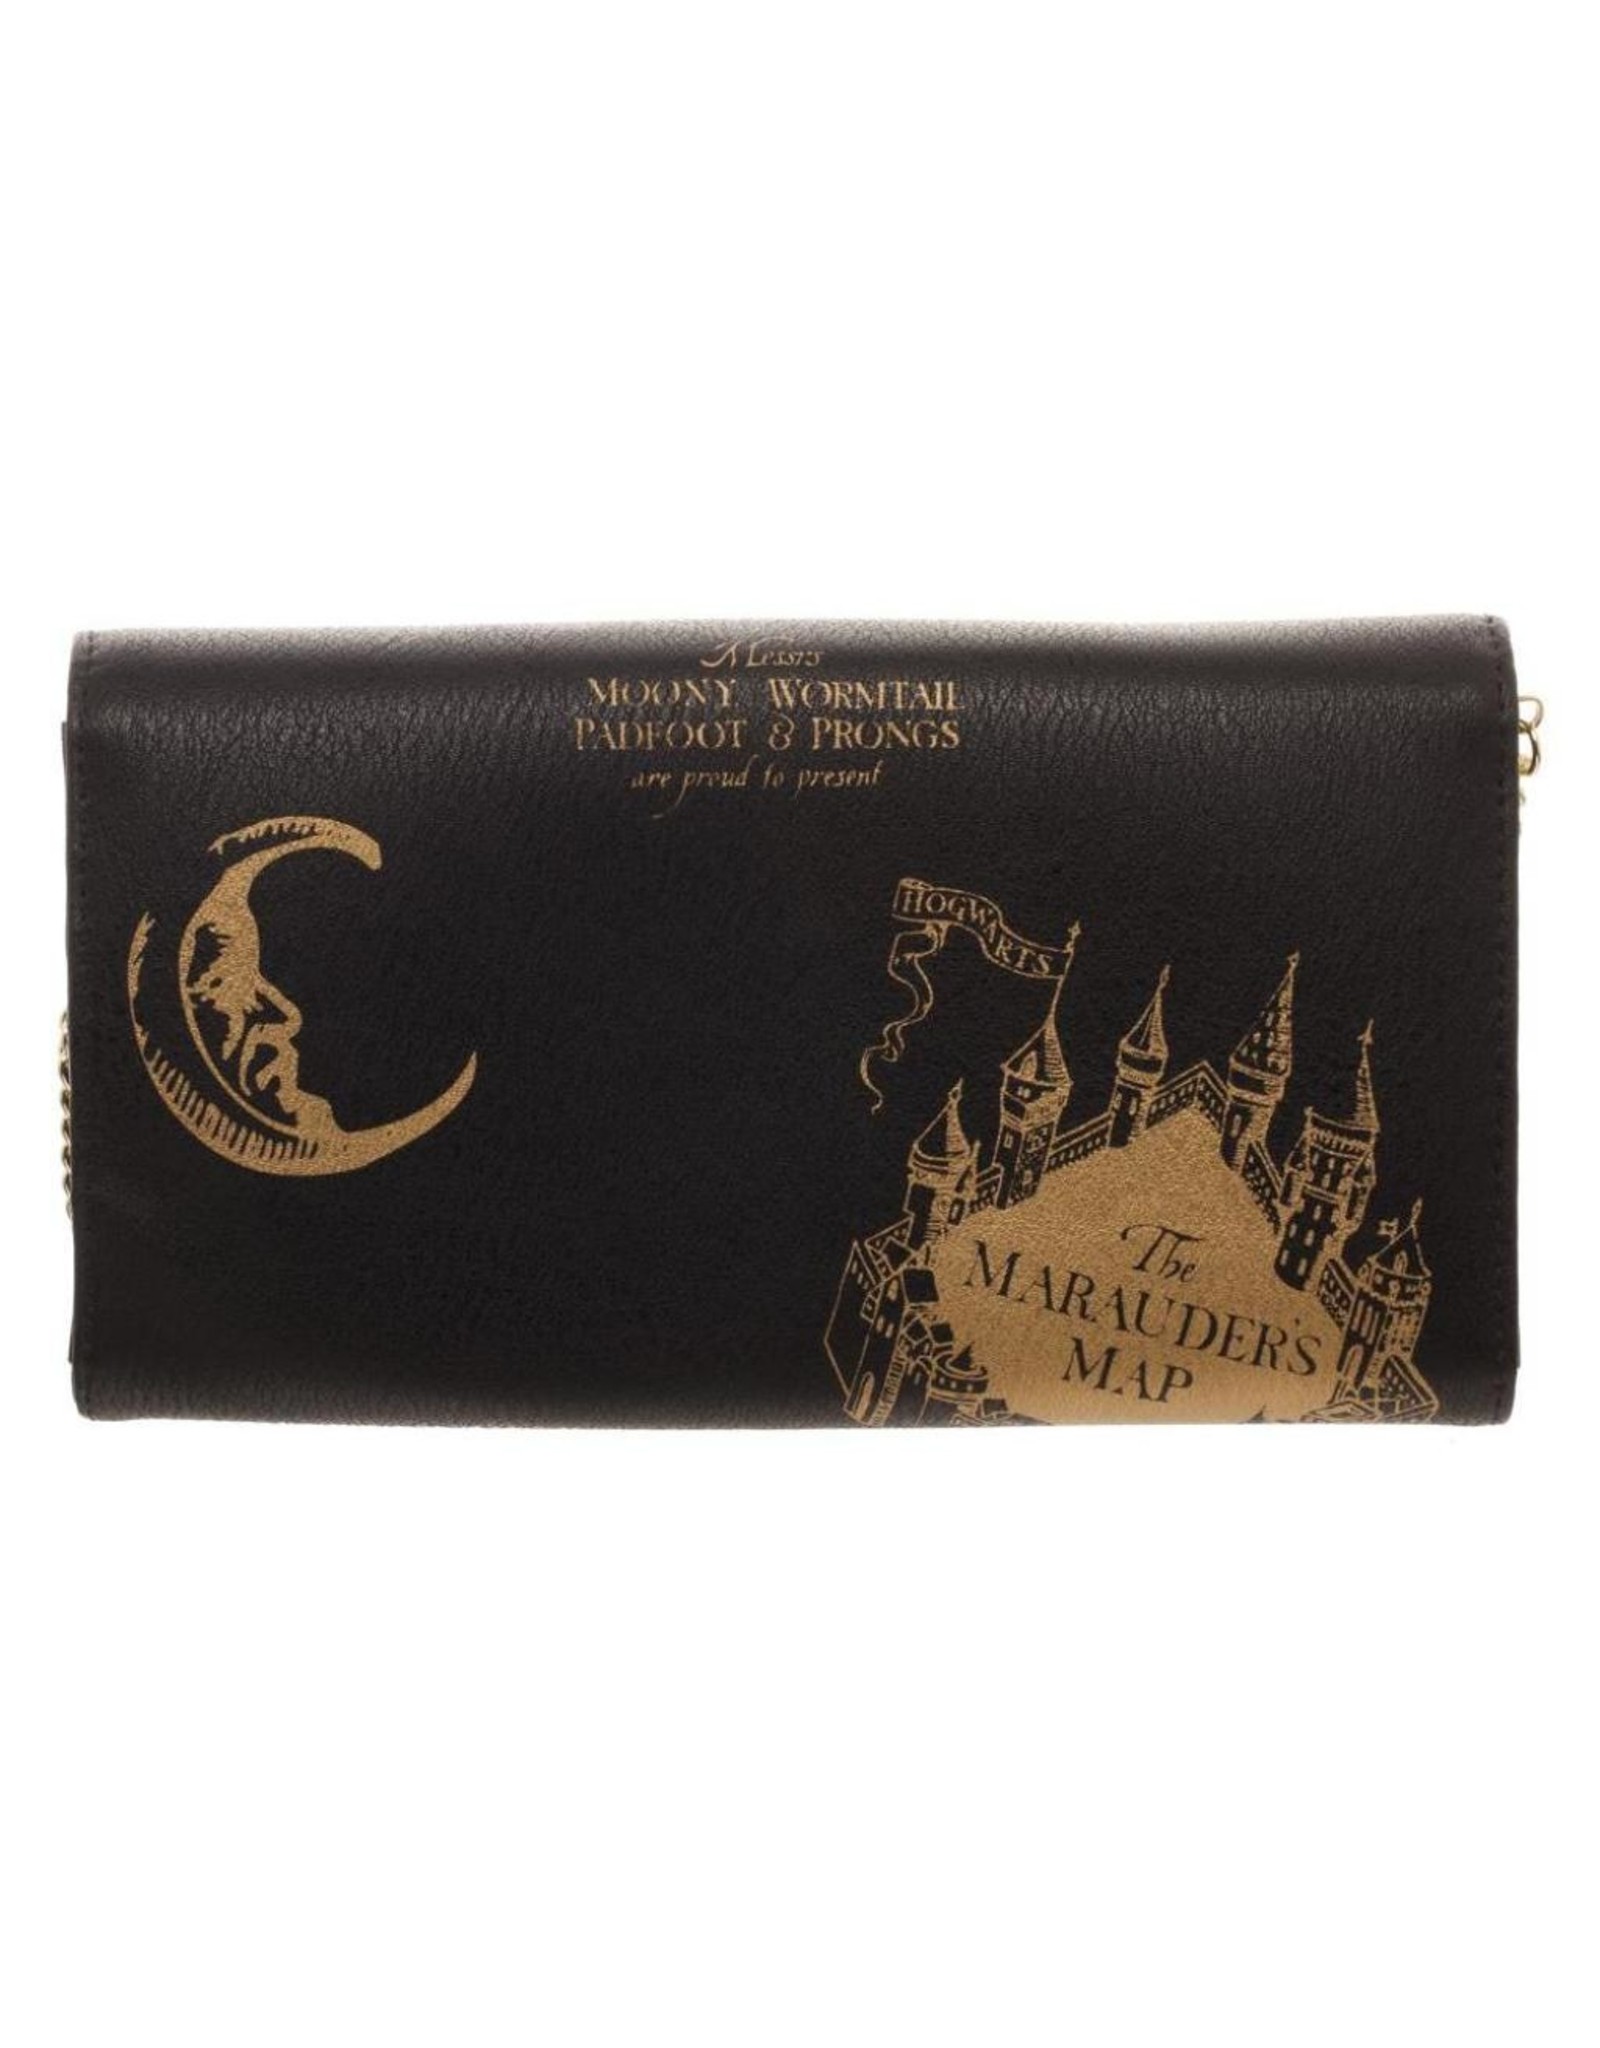 Loungefly Harry Potter Marauders Map Zip Pouch Cosmetic/Coin Bag/Case New!  | eBay